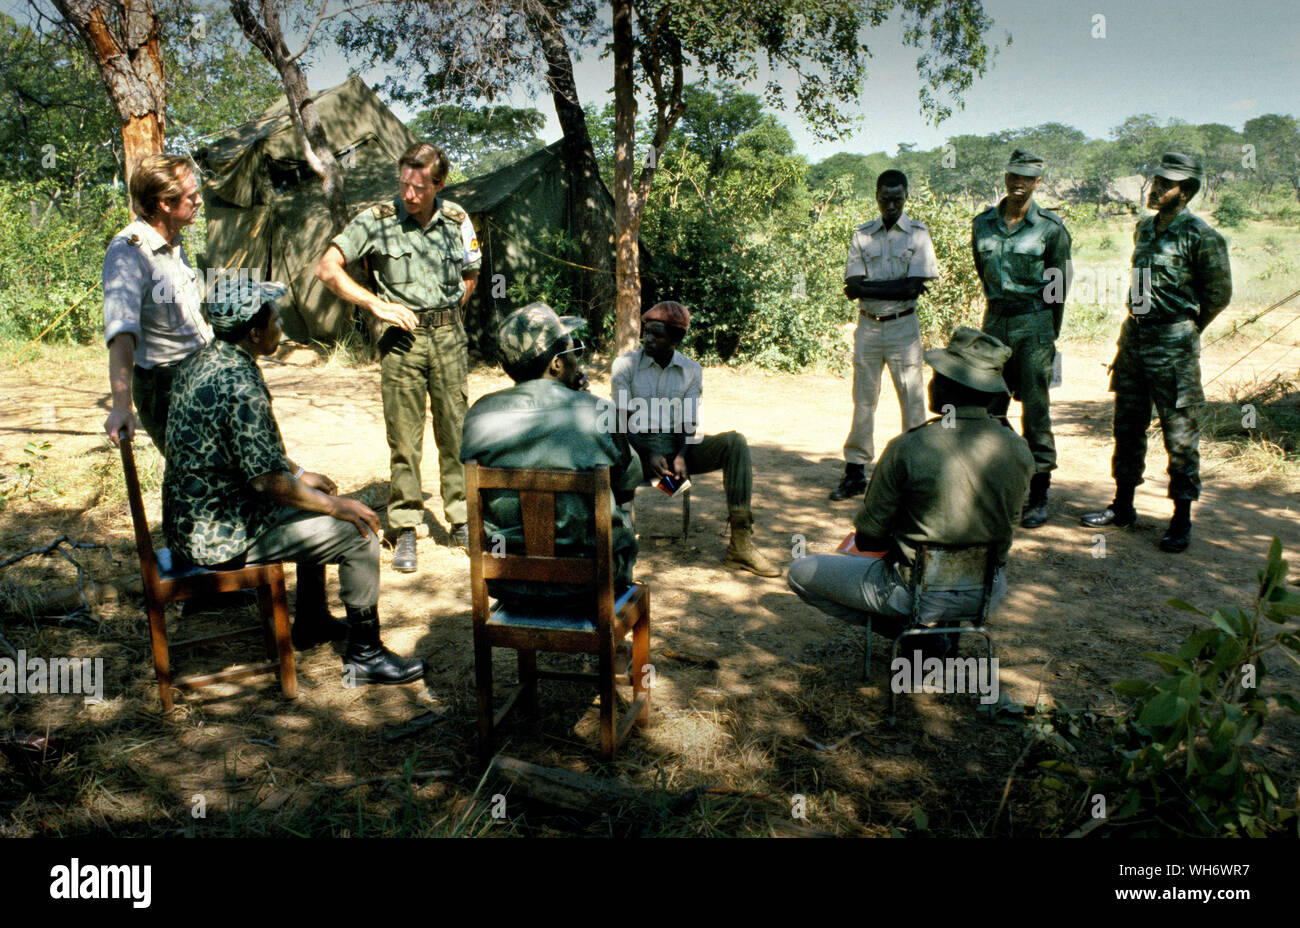 Lt Colonel Andrew Parker Bowles, on left, at Camp Alpha, Rhodesia-Zimbabwe 1980. He is seen supervising the Patriotic Front troops coming in from the bush into British Army run holding camps in the Zambezi valley as part of the Lancaster House peace process after the Rhodesian civil war ended.  He was Senior Military Liaison Officer to Lord Soames, when he was Governor of Rhodesia during its transition to the majority rule state of Zimbabwe in 1979–1980. He was staff qualified (sq), and became a Lieutenant-Colonel 30 June 1980.AK47AK47 He was awarded the Queen's Commendation fo Stock Photo